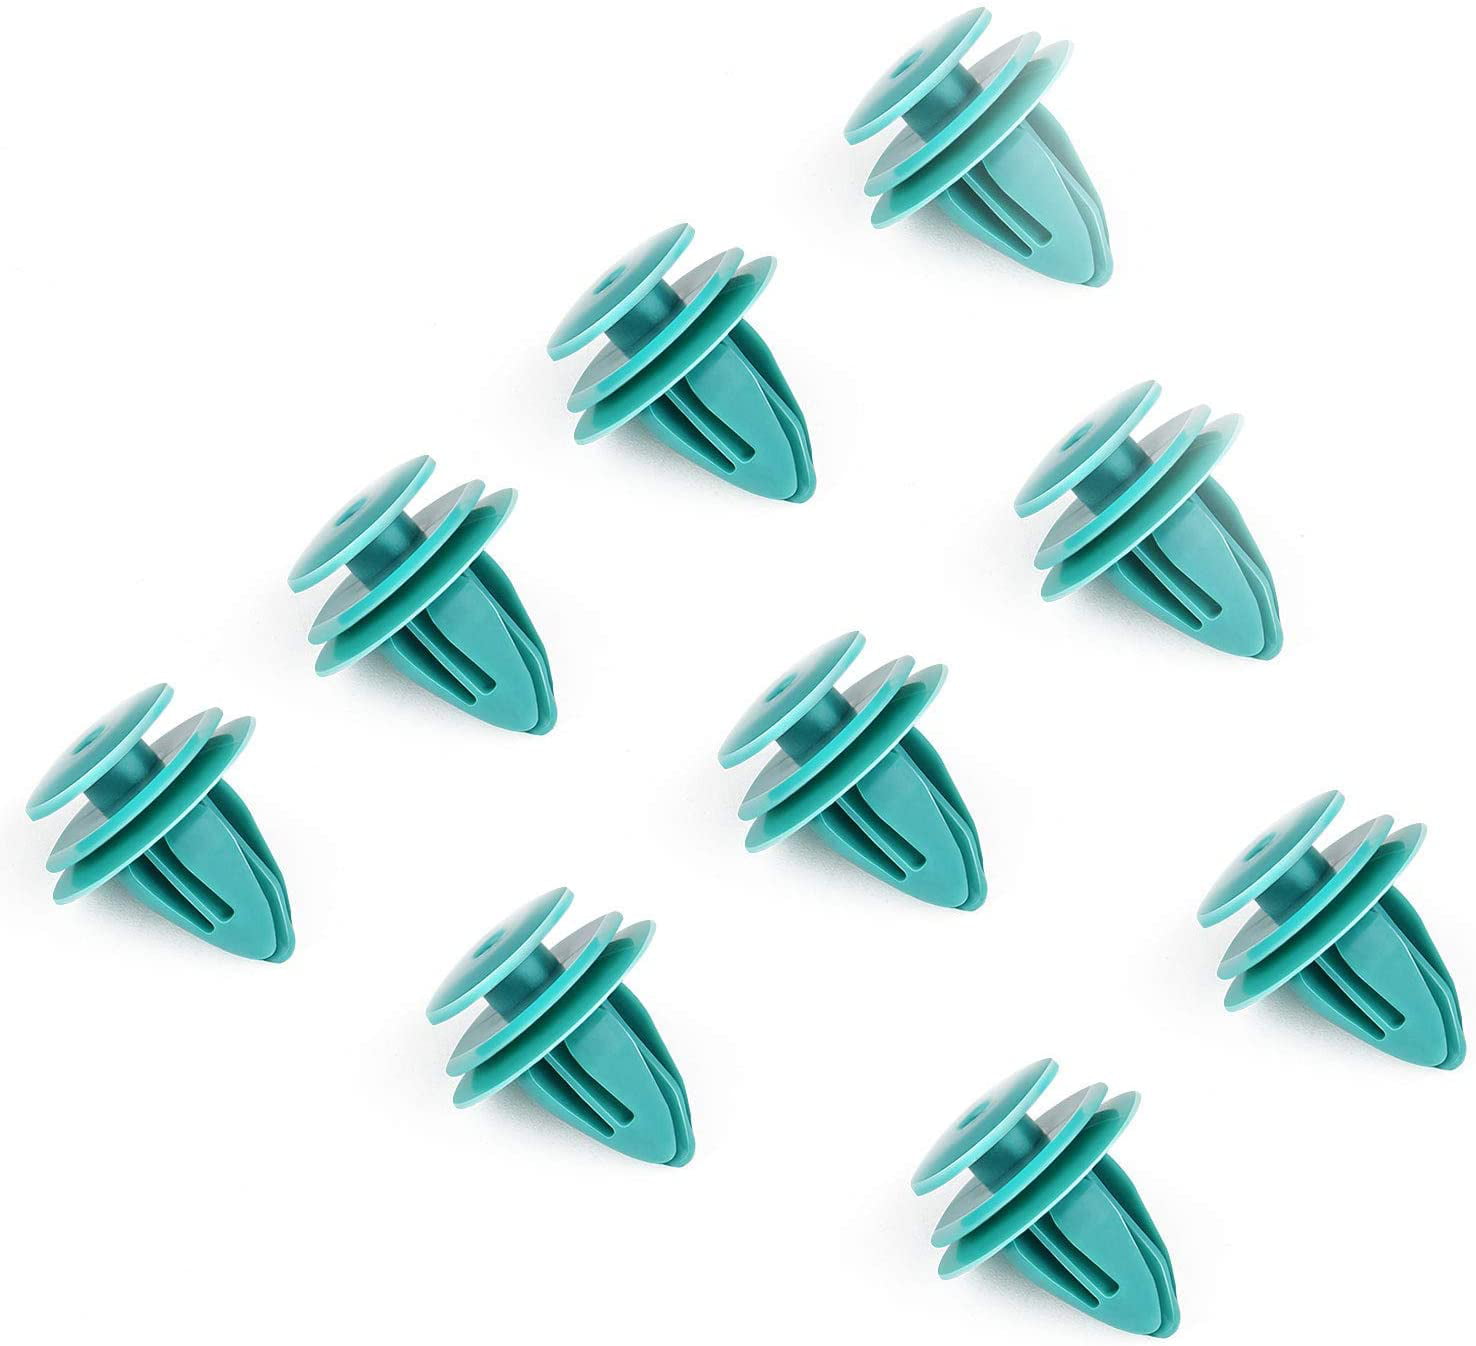 50 x Garnish Moulding Retainer Panel Clip For GM Pontiac For Toyota Camry Tundra